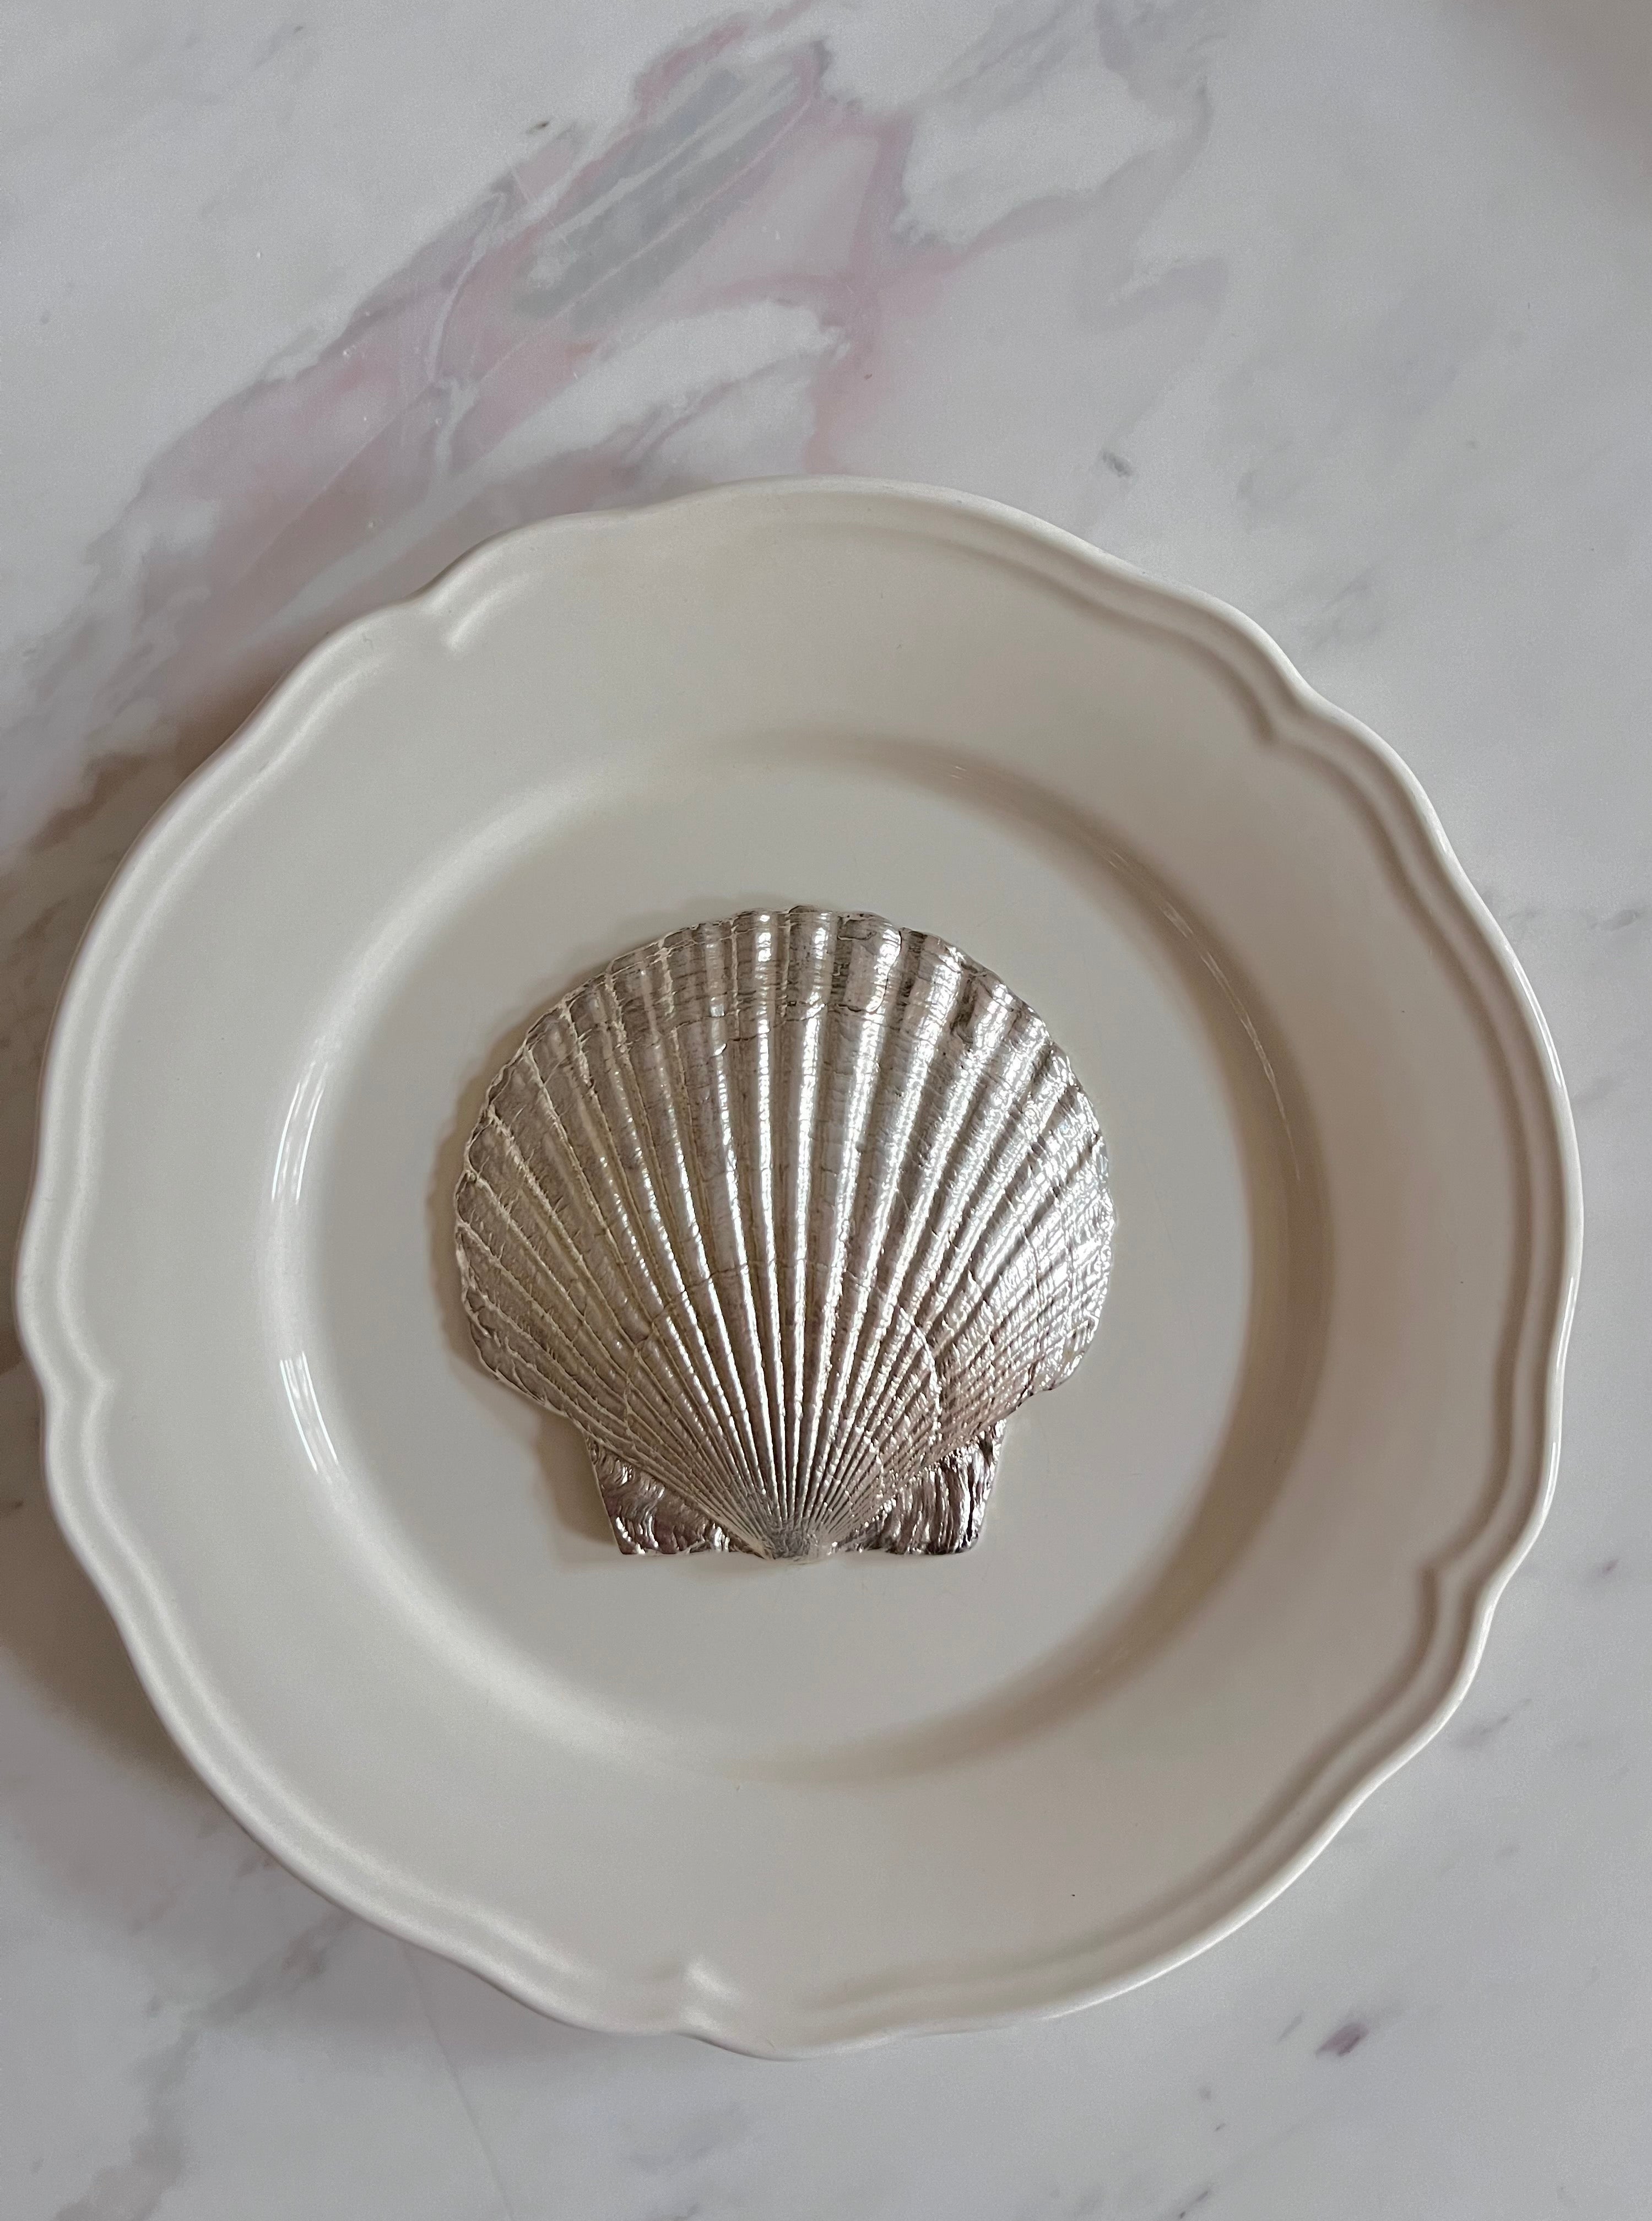 Handcrafted silver plated clam shell plate for serving oysters and clams